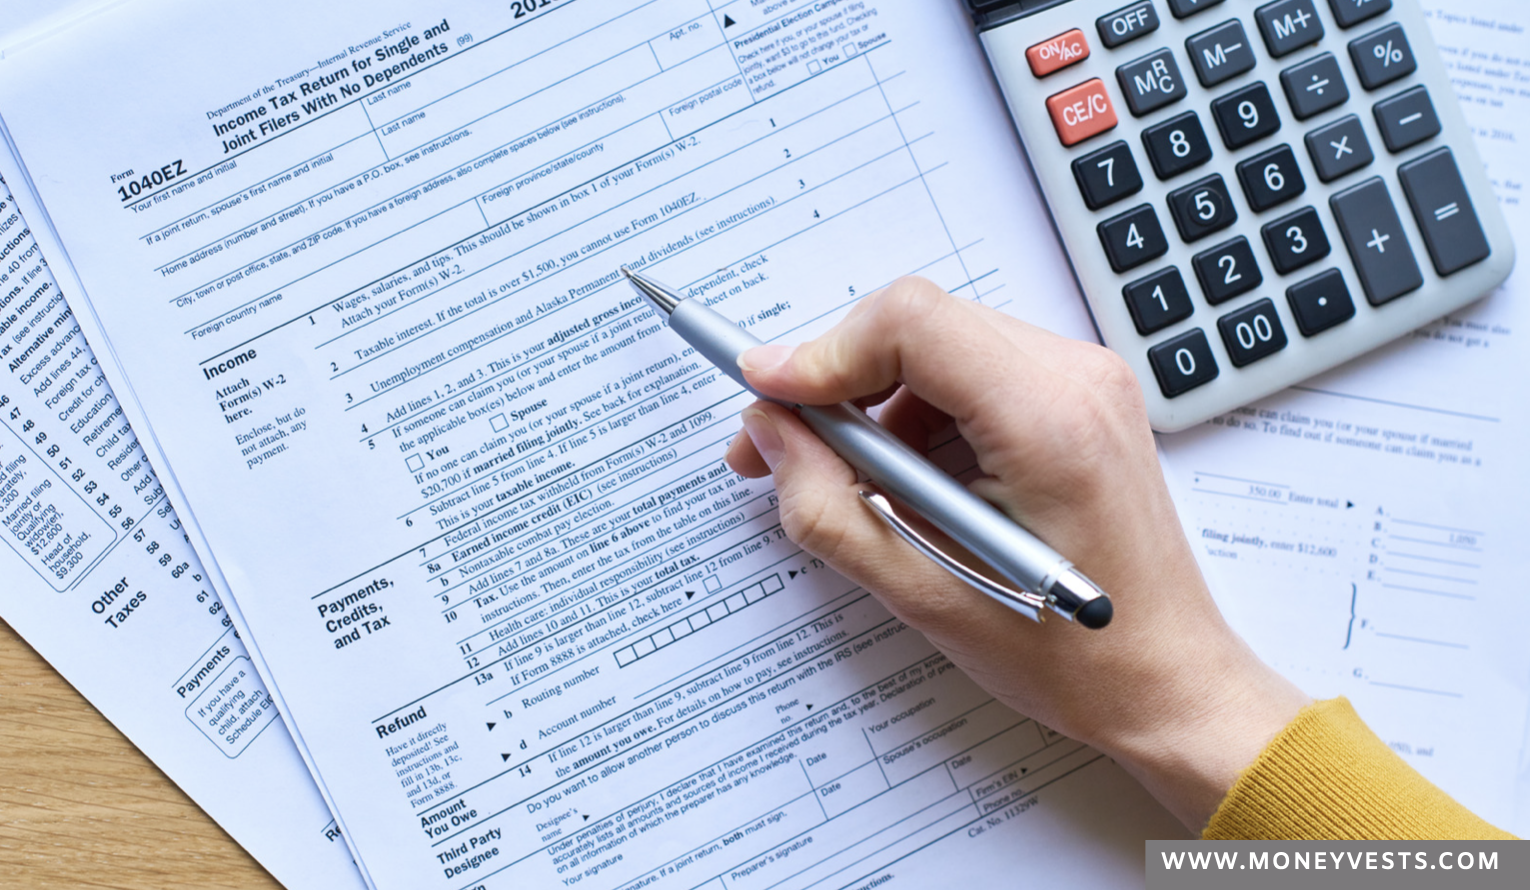 When Should I Get My Tax Return? 5 things to know